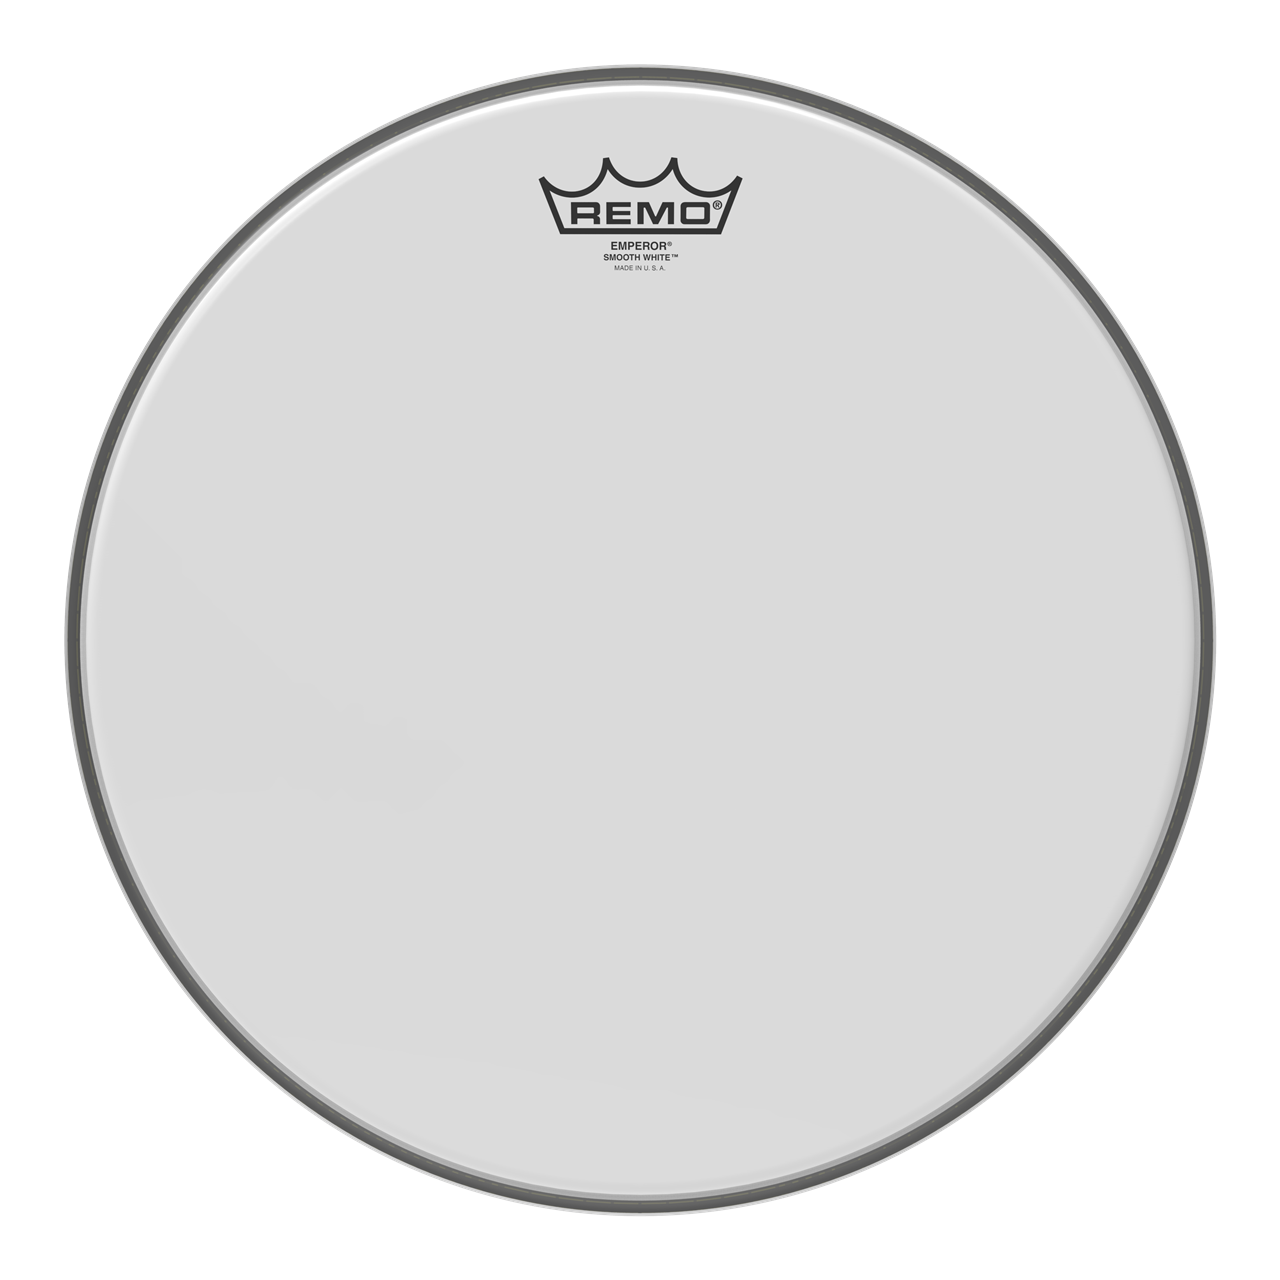 Remo BE-0208-00 Emperor, 8" Smooth White